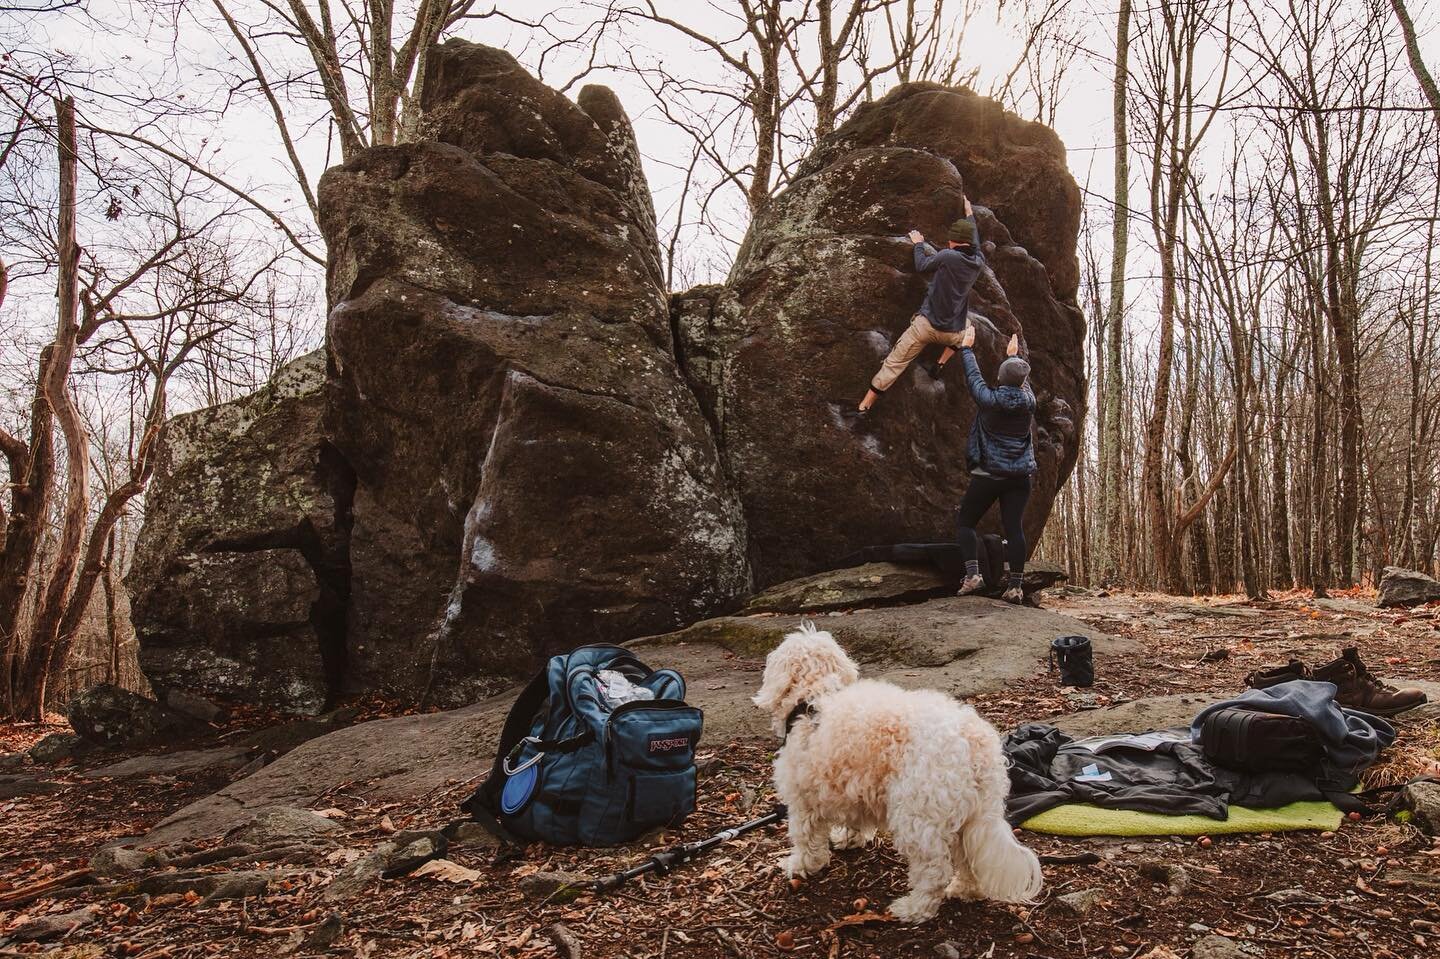 Happy Valentine&rsquo;s Day to my hubby! 😘You know I&rsquo;ve got your back just as you always have mine 😜🥰oh and can&rsquo;t forget about my little puff too!!
.
.
.
#adventurephotographer #bouldering #graysonhighlandsstatepark #outdoorfun #boulde